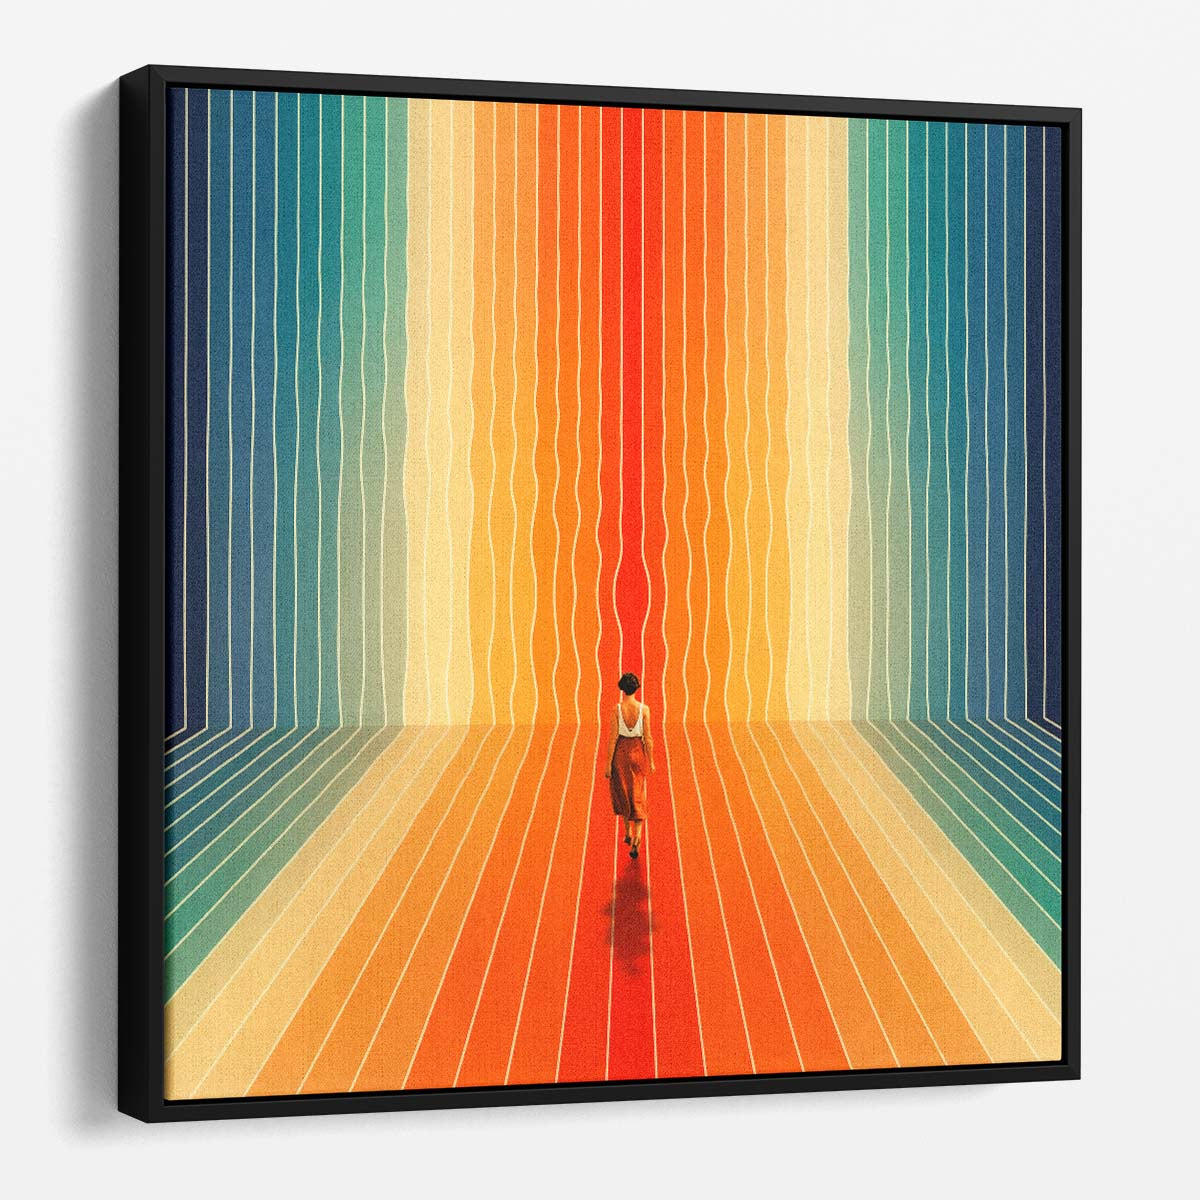 Colorful Surreal Rainbow Woman Abstract Illusion Wall Art by Luxuriance Designs. Made in USA.